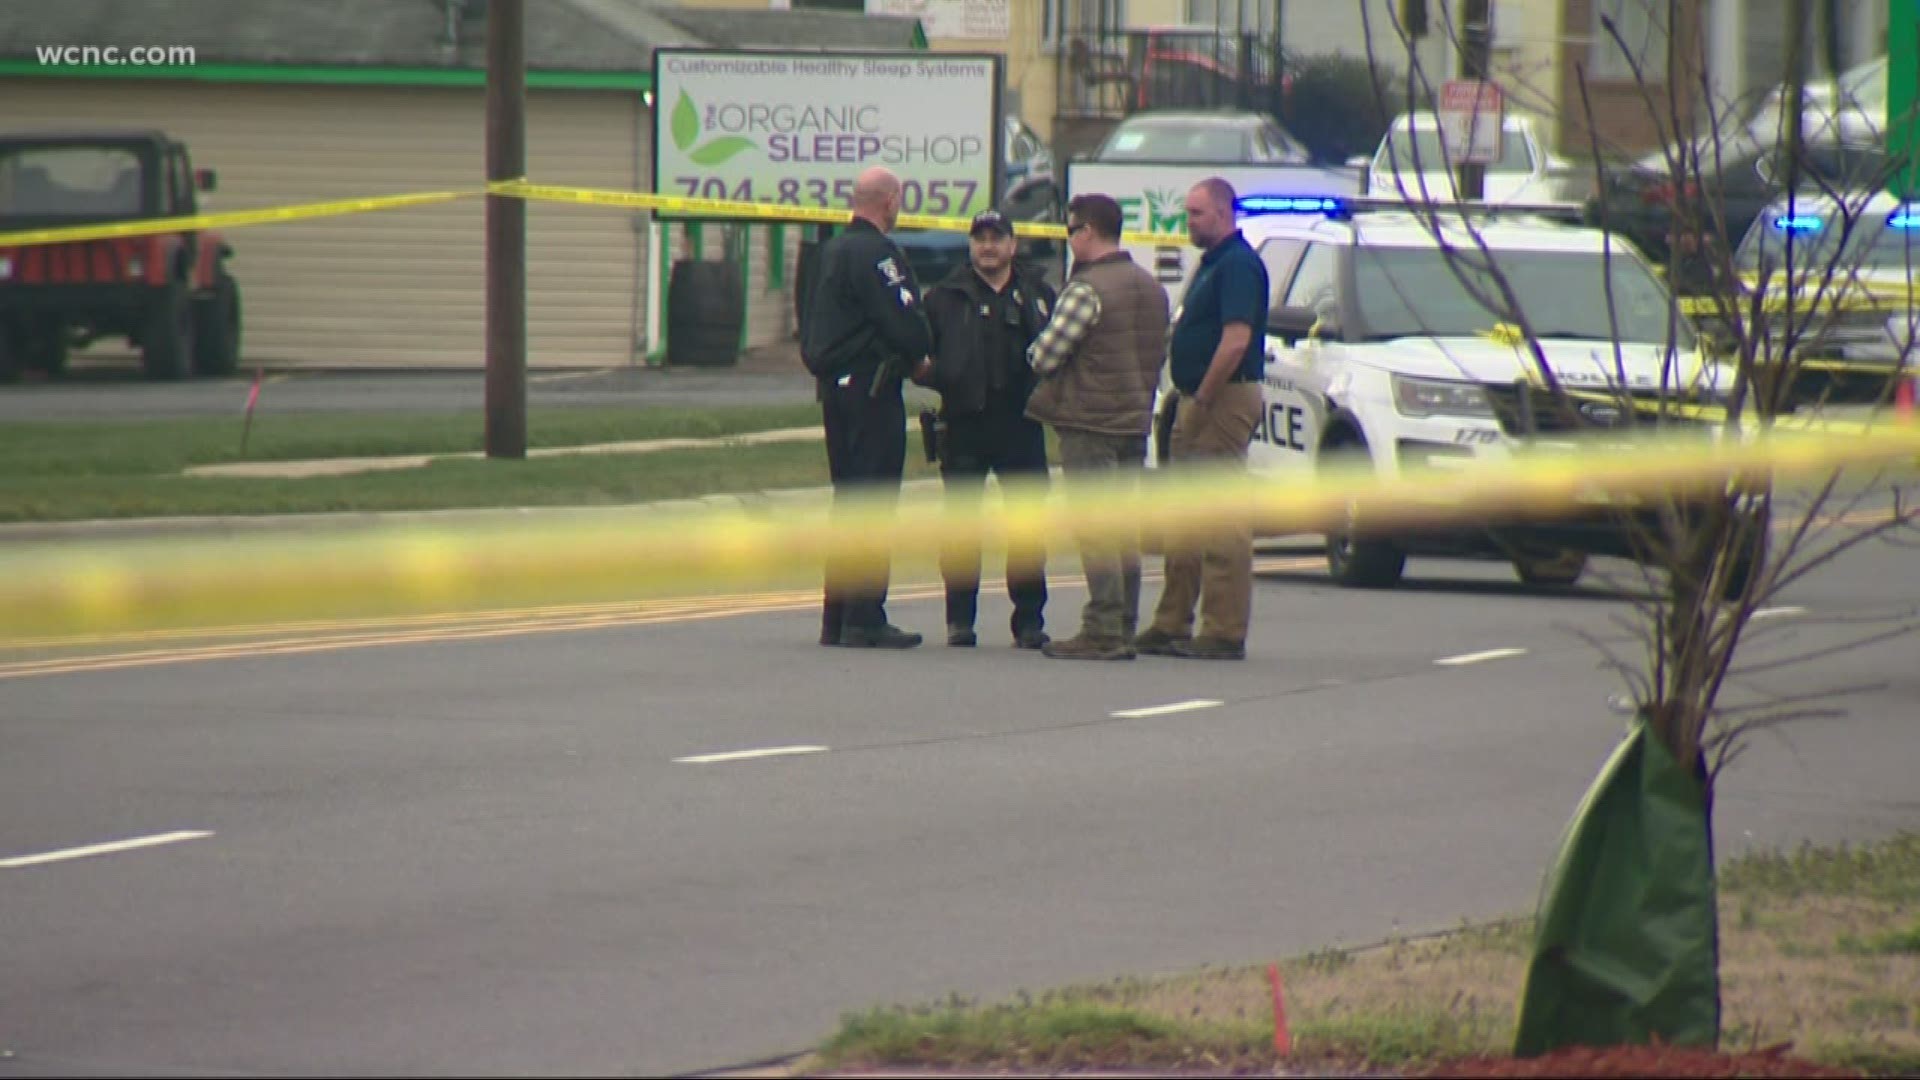 Two Pineville Police officers shot at the man waving a gun at traffic, the police department confirmed Saturday.